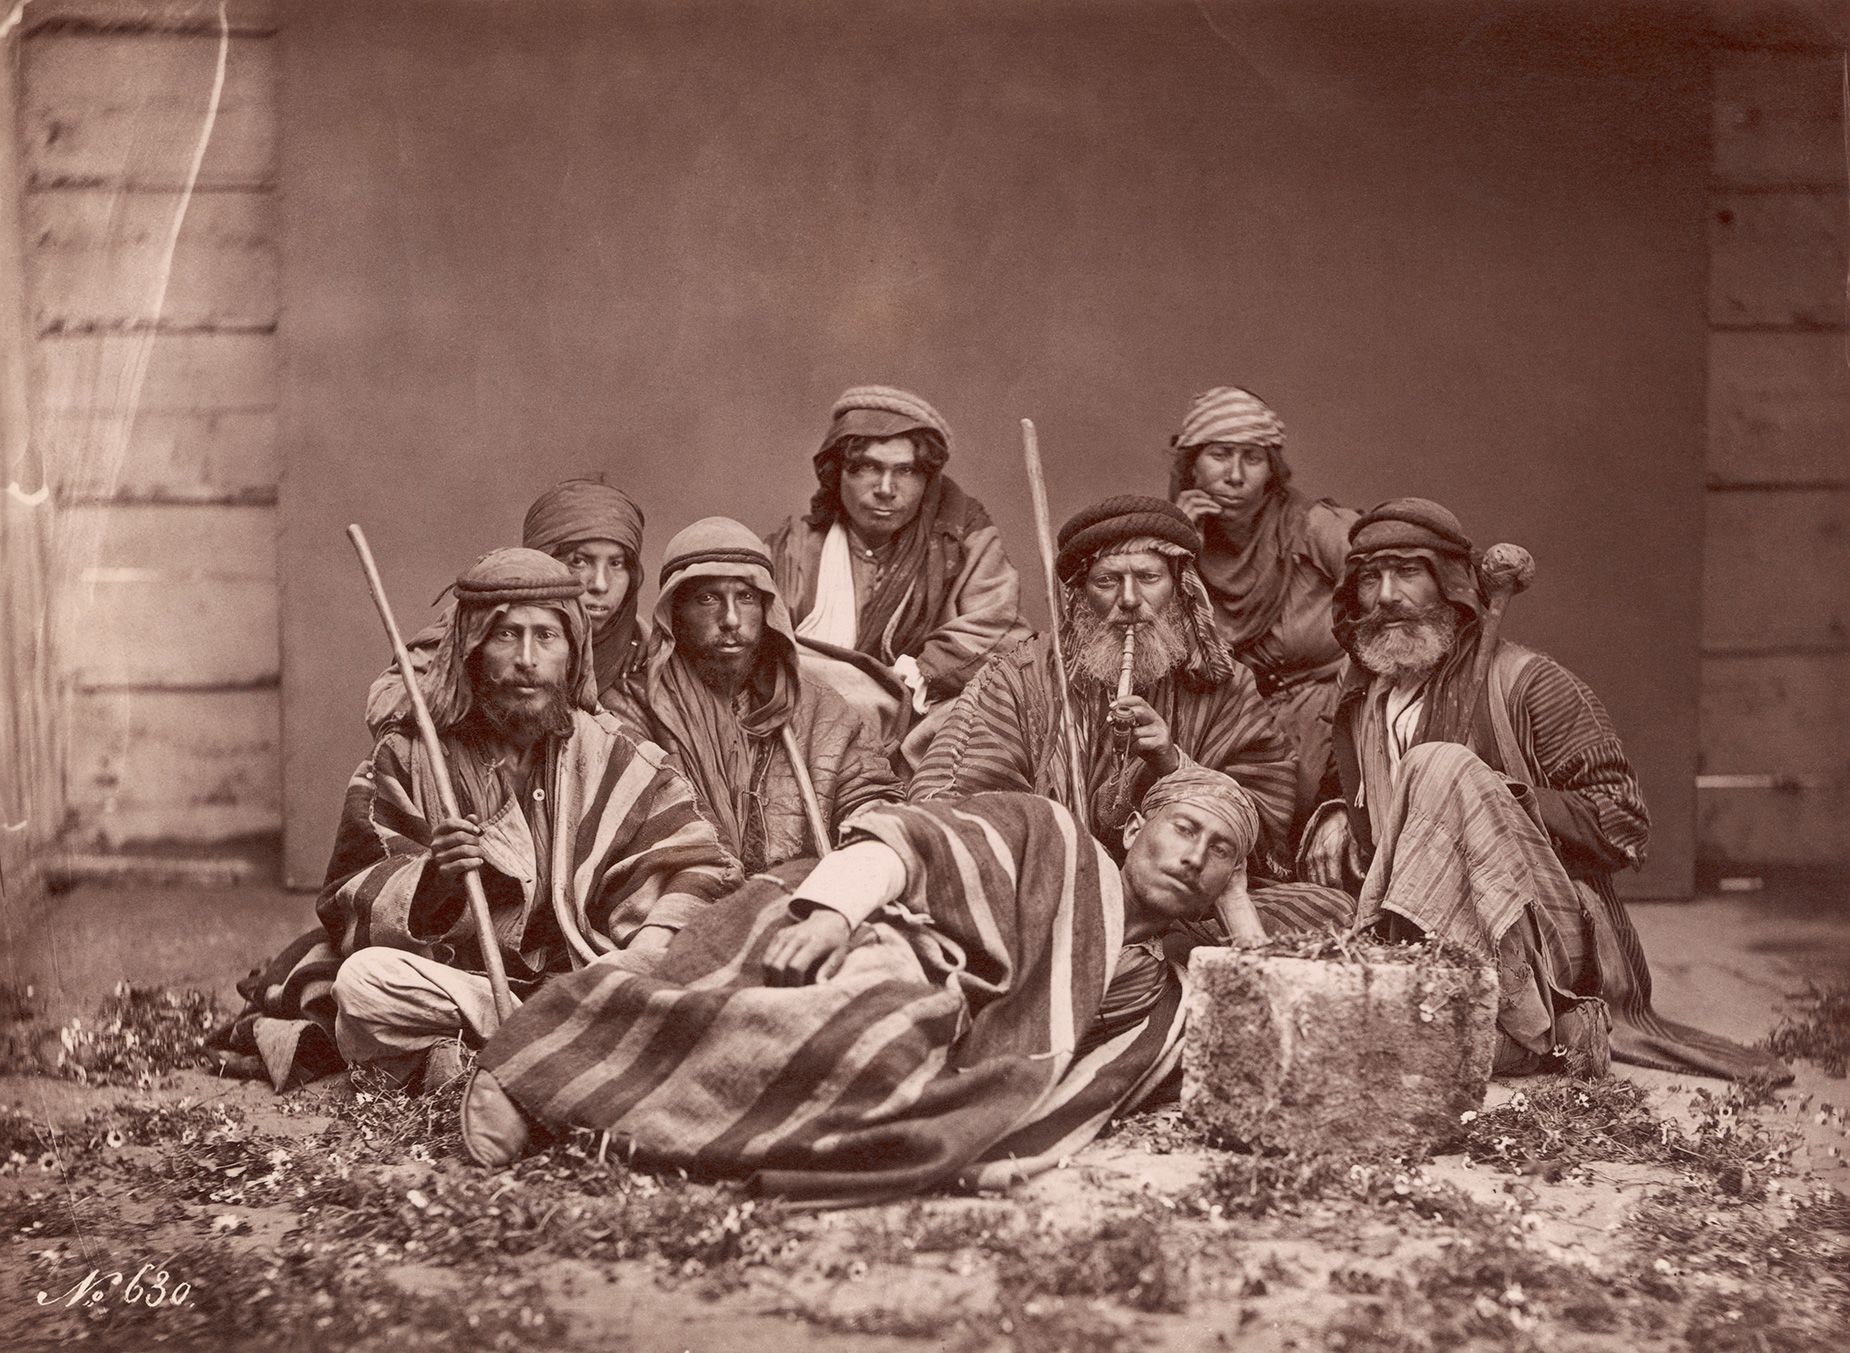 Historians trace the history of the keffiyeh to nomadic Bedouin farmers in historic Palestine, who use the scarves as protection from the sun and sand.